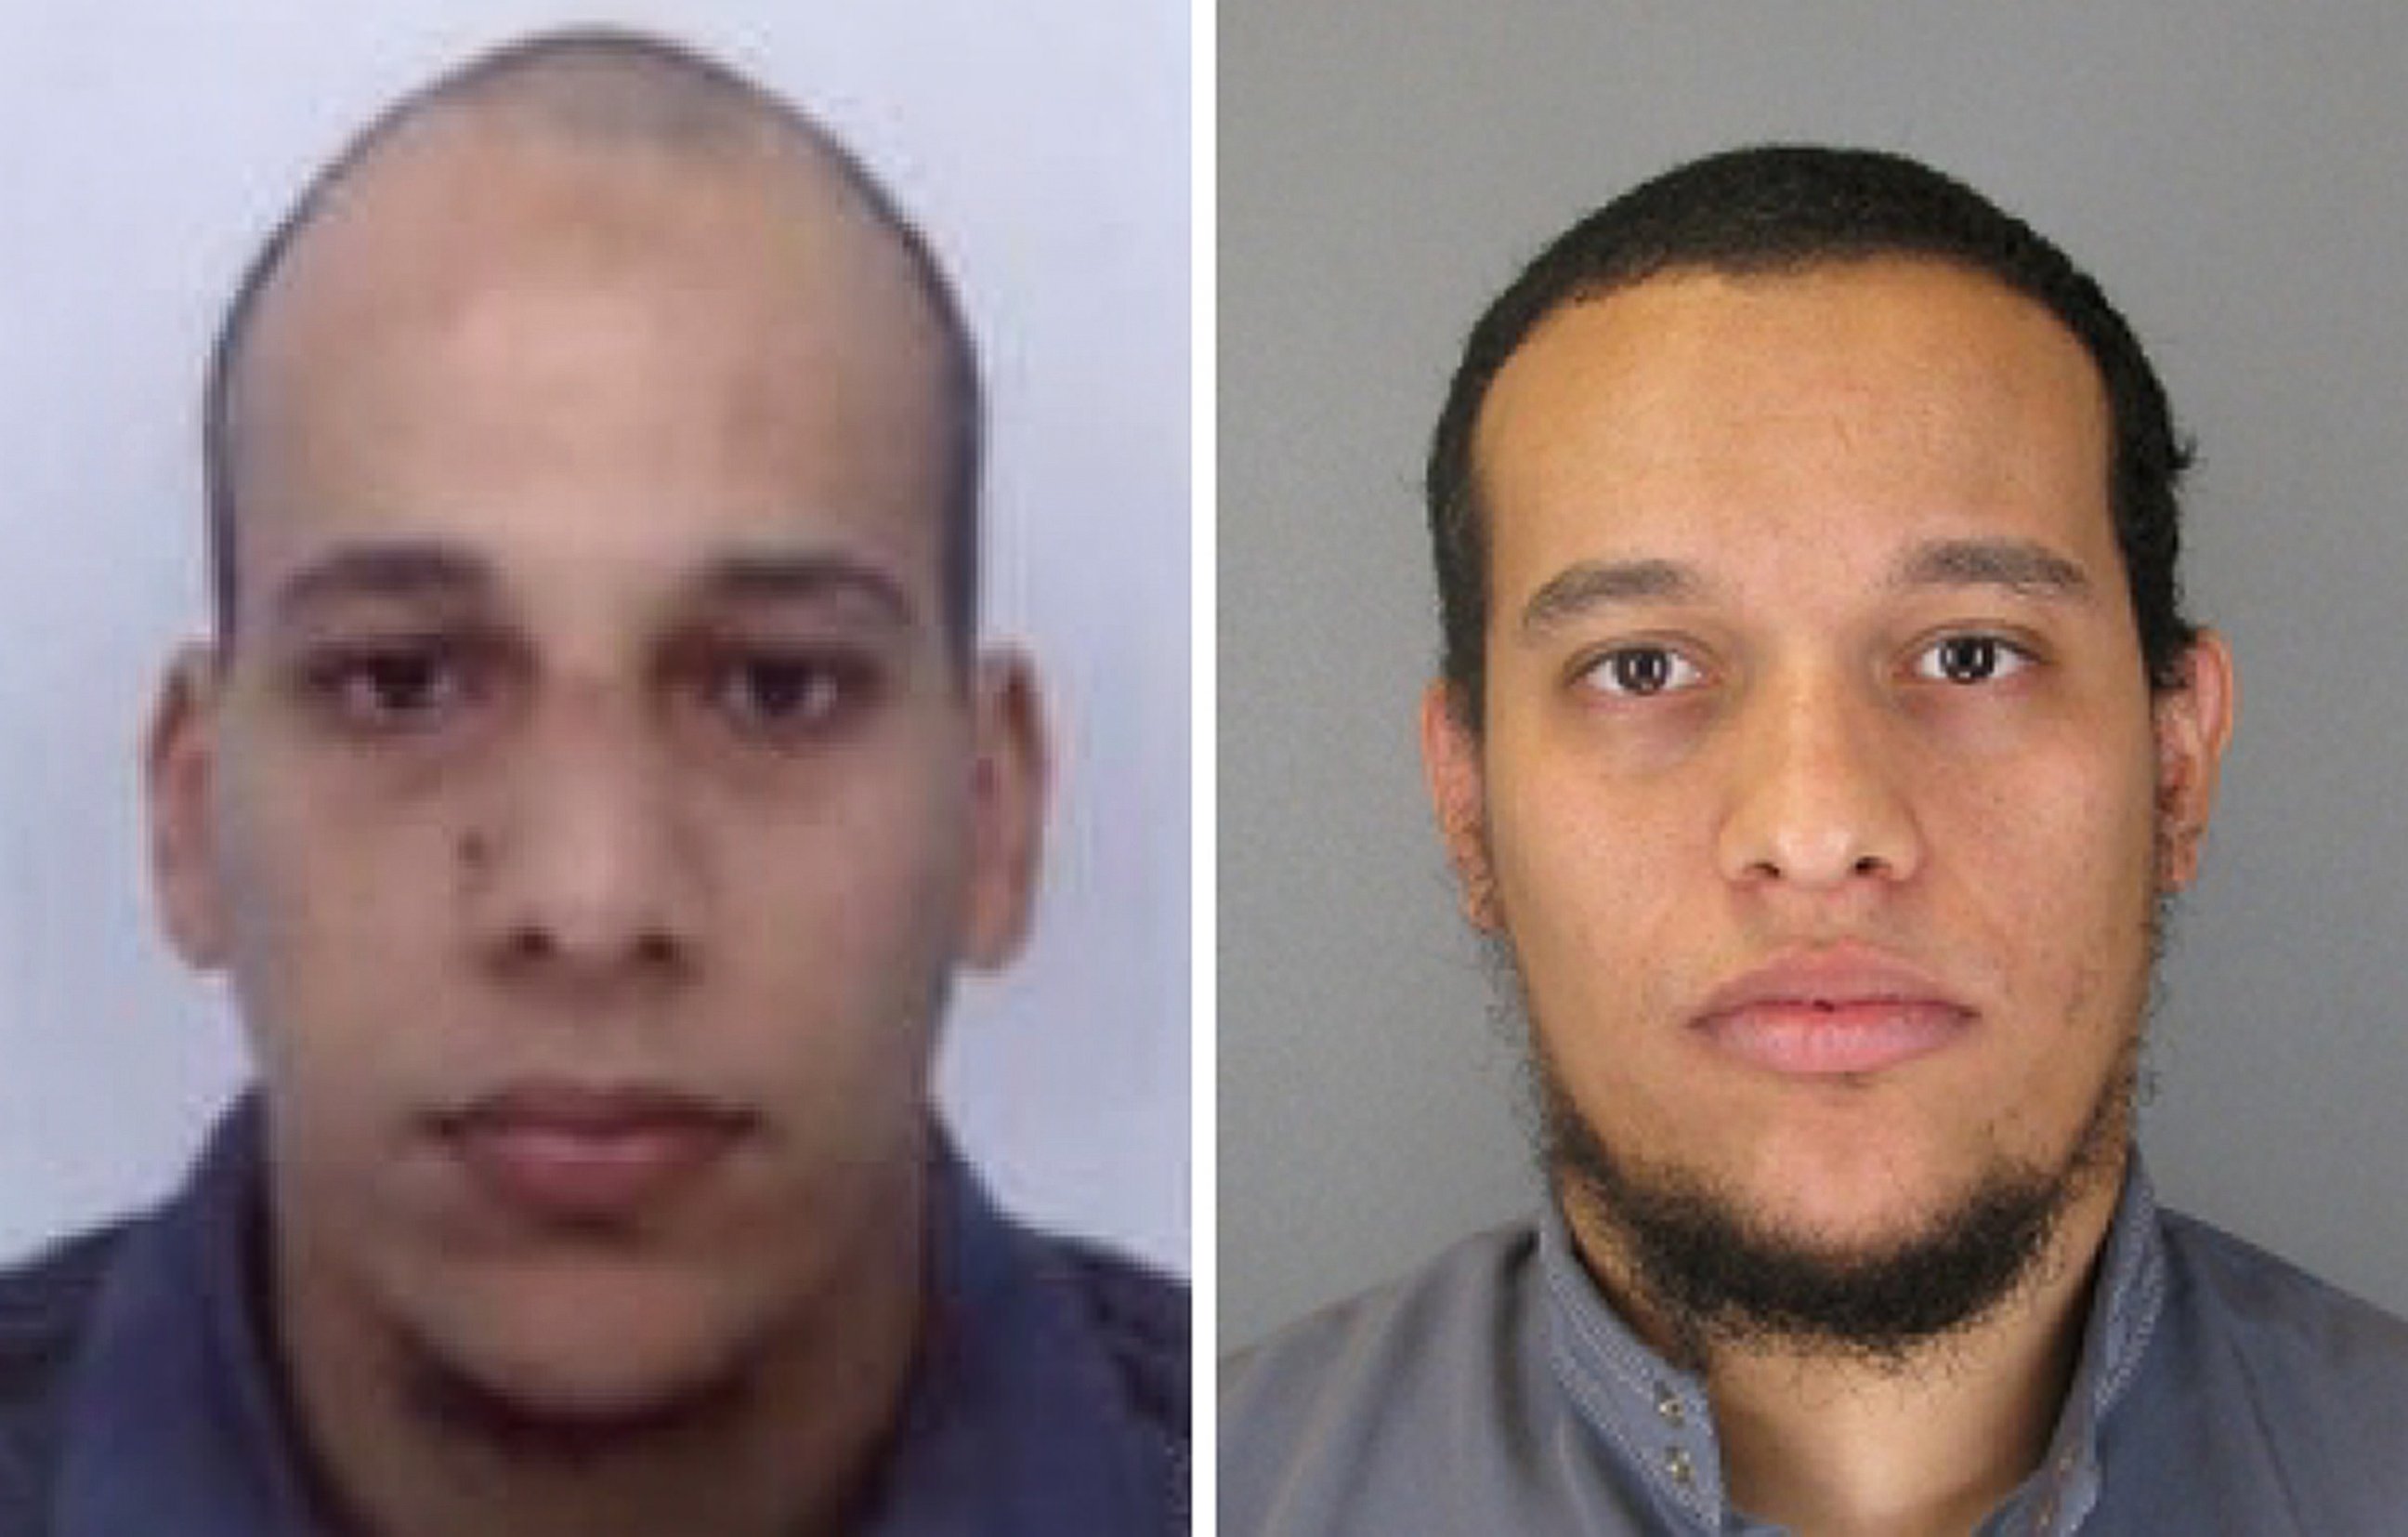 PHOTO: French authorities say two brothers, Cherif Kouachi and Said Kouachi are two of the three men allegedly involved in a terrorist attack on the offices of Charlie Hebdo in Paris on Jan. 7, 2015.